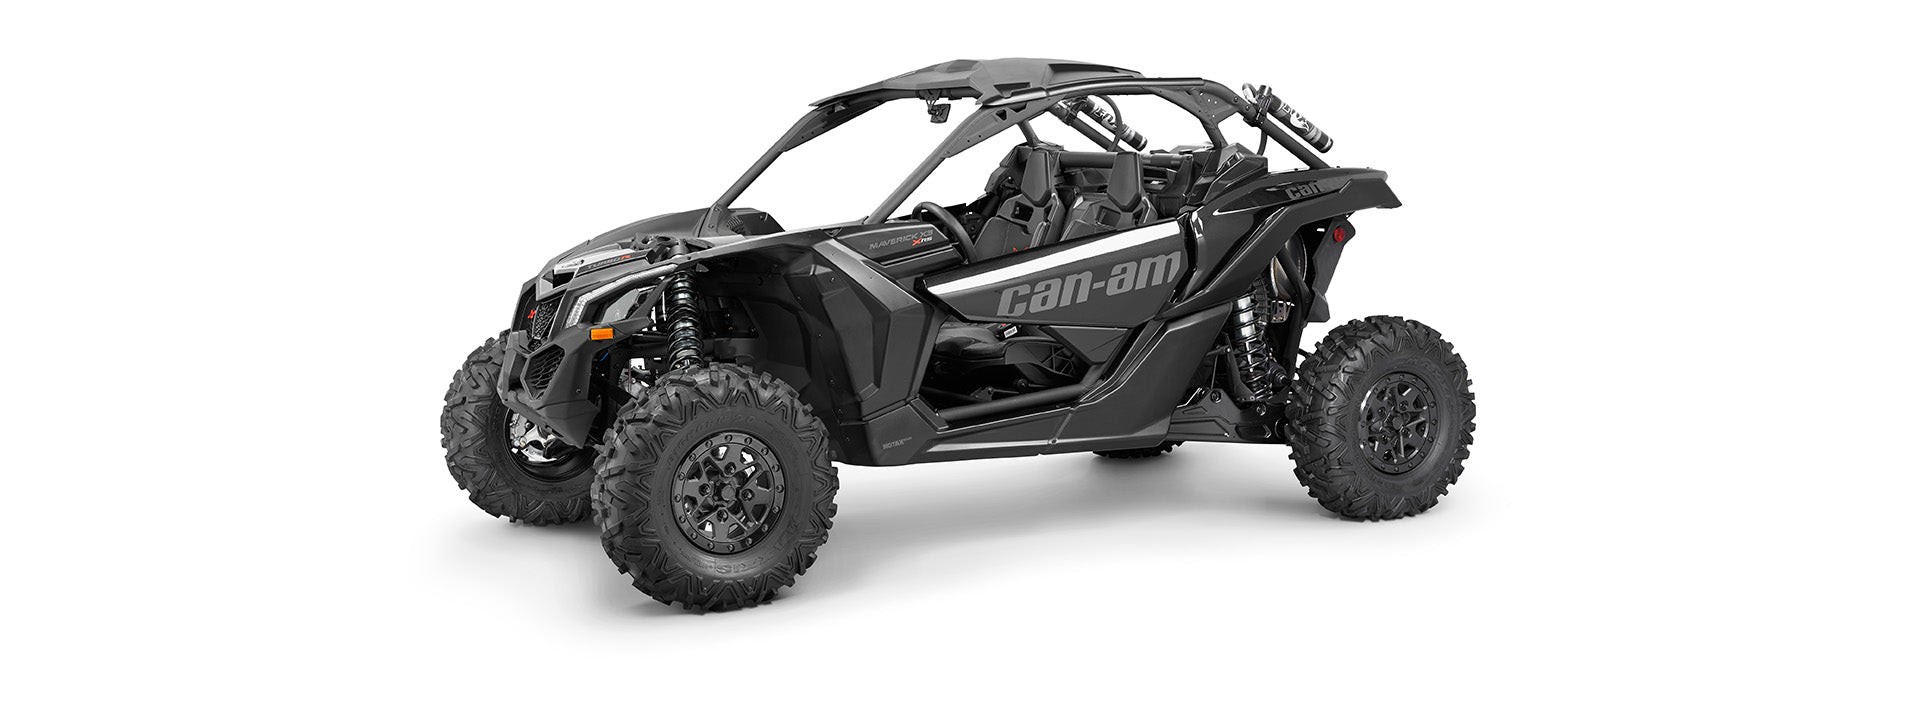 A black can-am powersports vehicle with stealthbox installed on a white background. 